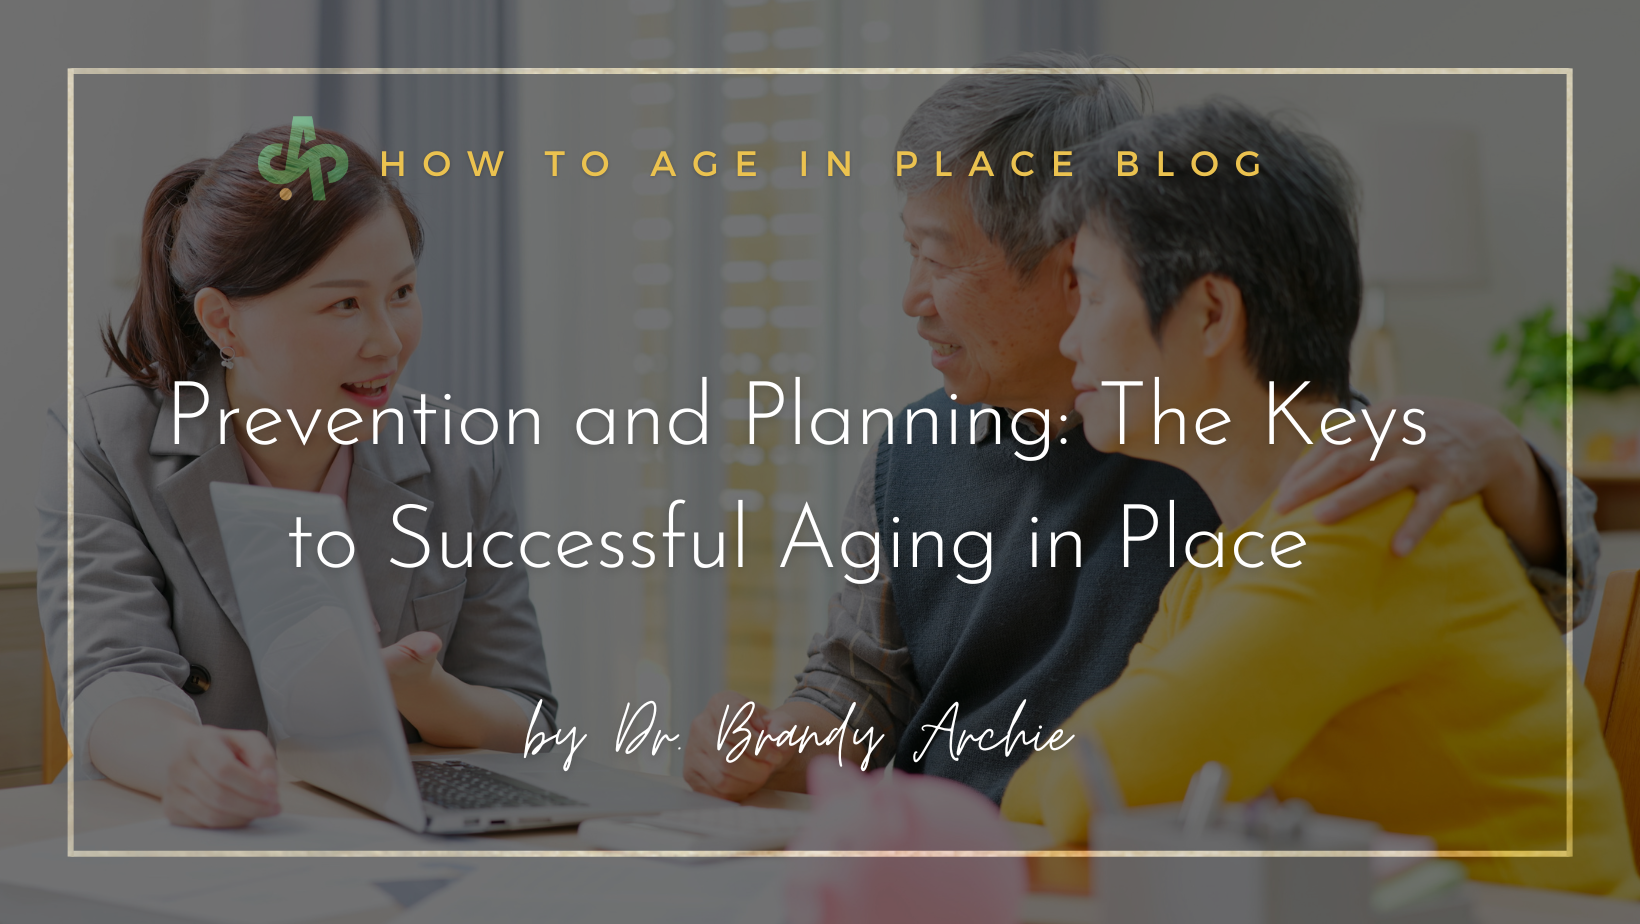 Prevention and Planning: The Keys to Successful Aging in Place